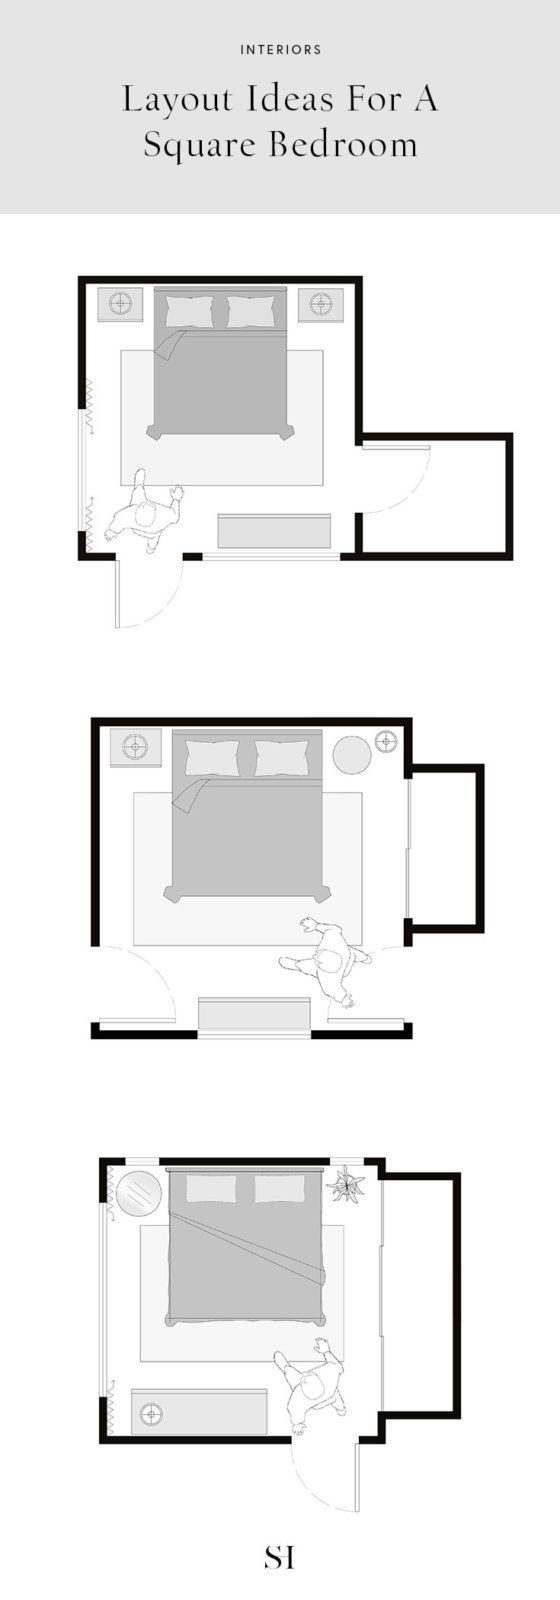 5 Layout Ideas for a 12 x 12 Square Bedroom (w/ Floor